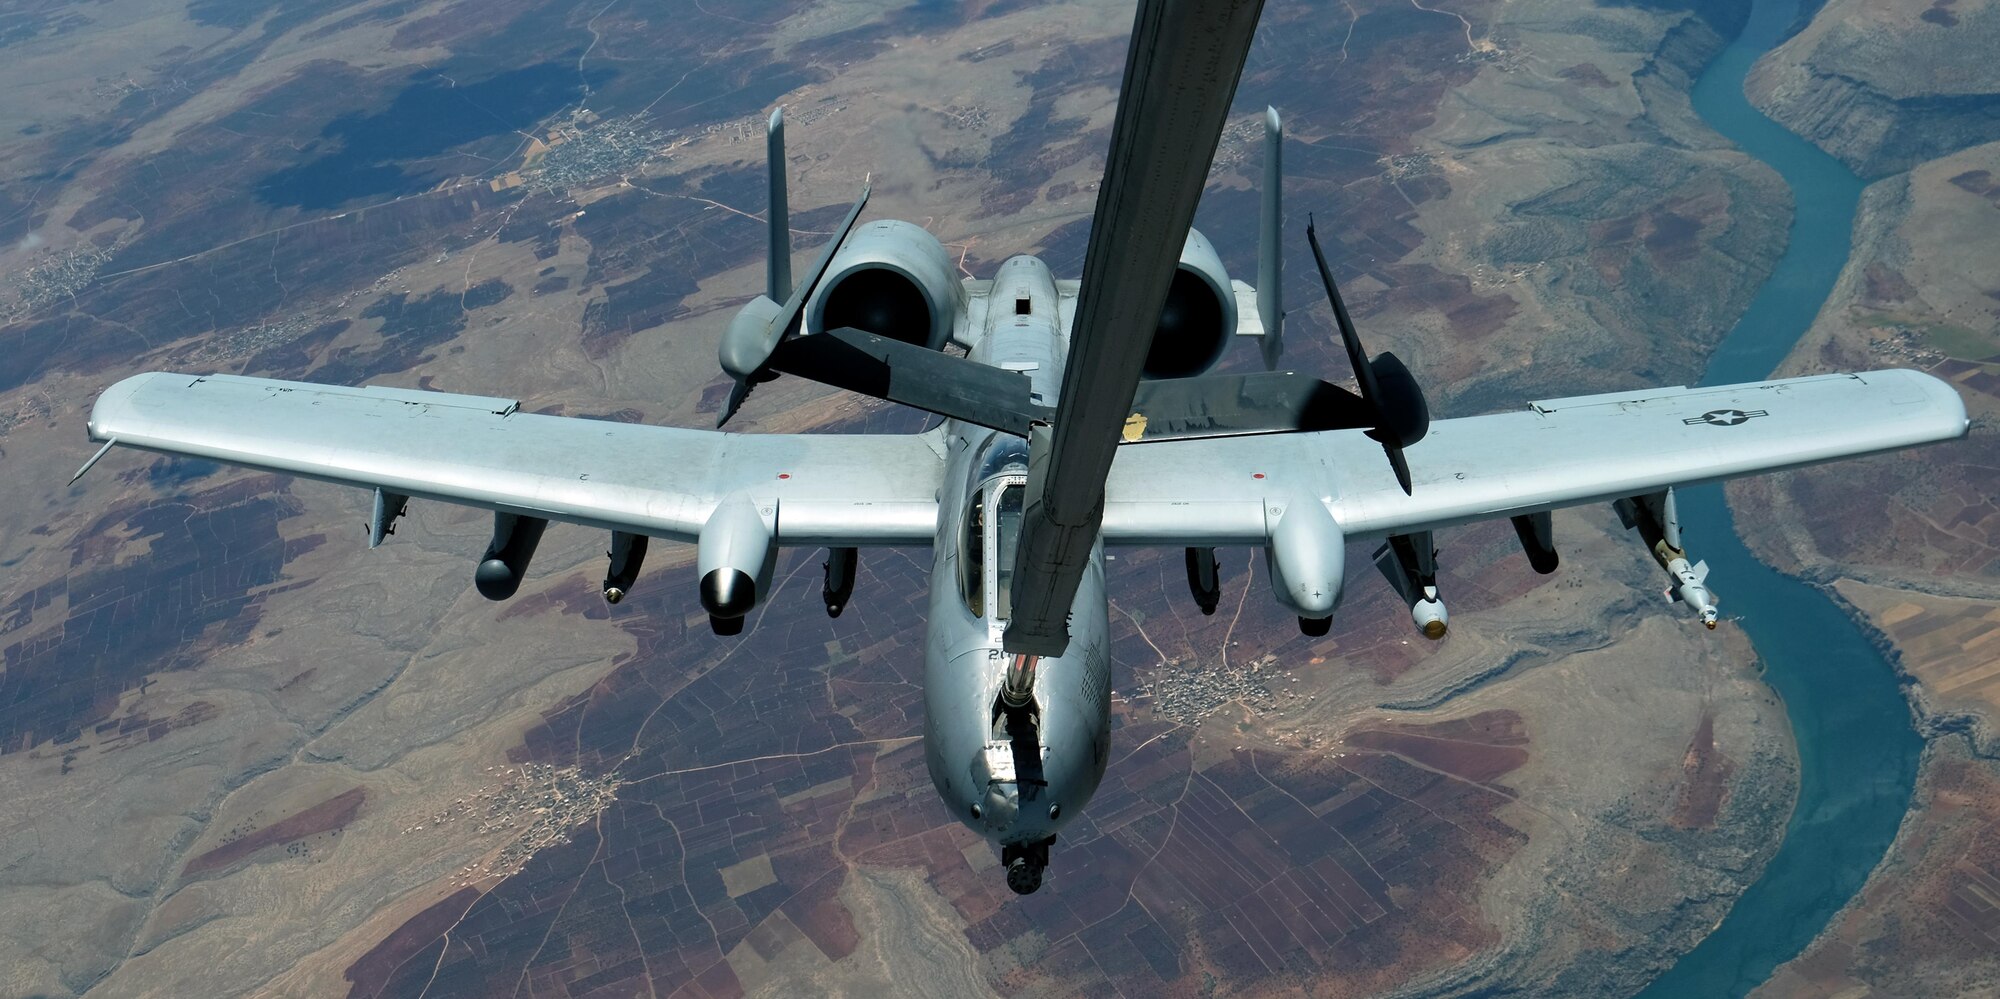 An A-10 Thunderbolt II receives fuel from a 908th Expeditionary Air Refueling Squadron KC-10 Extender May 31, 2017, over an undisclosed location in southwest Asia. The Thunderbolt II can employ a wide variety of conventional munitions and the GAU-8/A 30mm cannon, capable of firing 3,900 rounds per minute to defeat a wide variety of targets including tanks. (U.S. Air Force photo by Senior Airman Preston Webb)